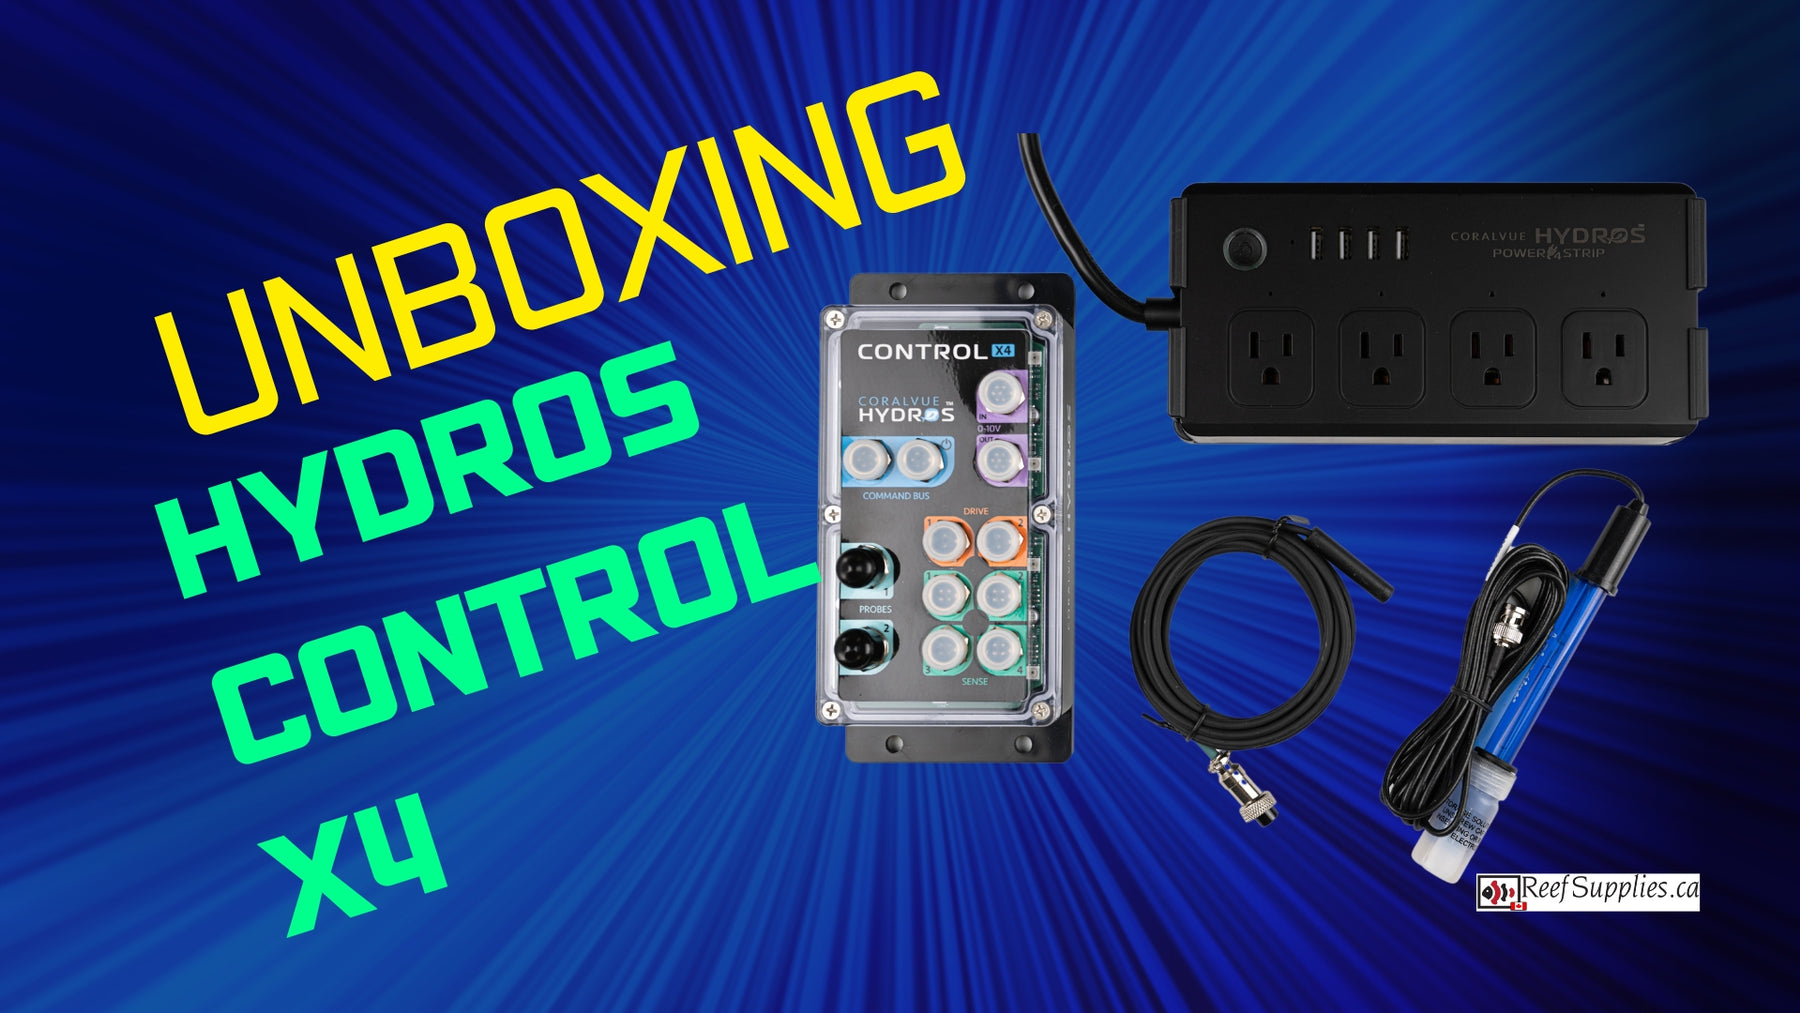 HYDROS Control CX 4 Starter Pack / whats in the box / Unboxing